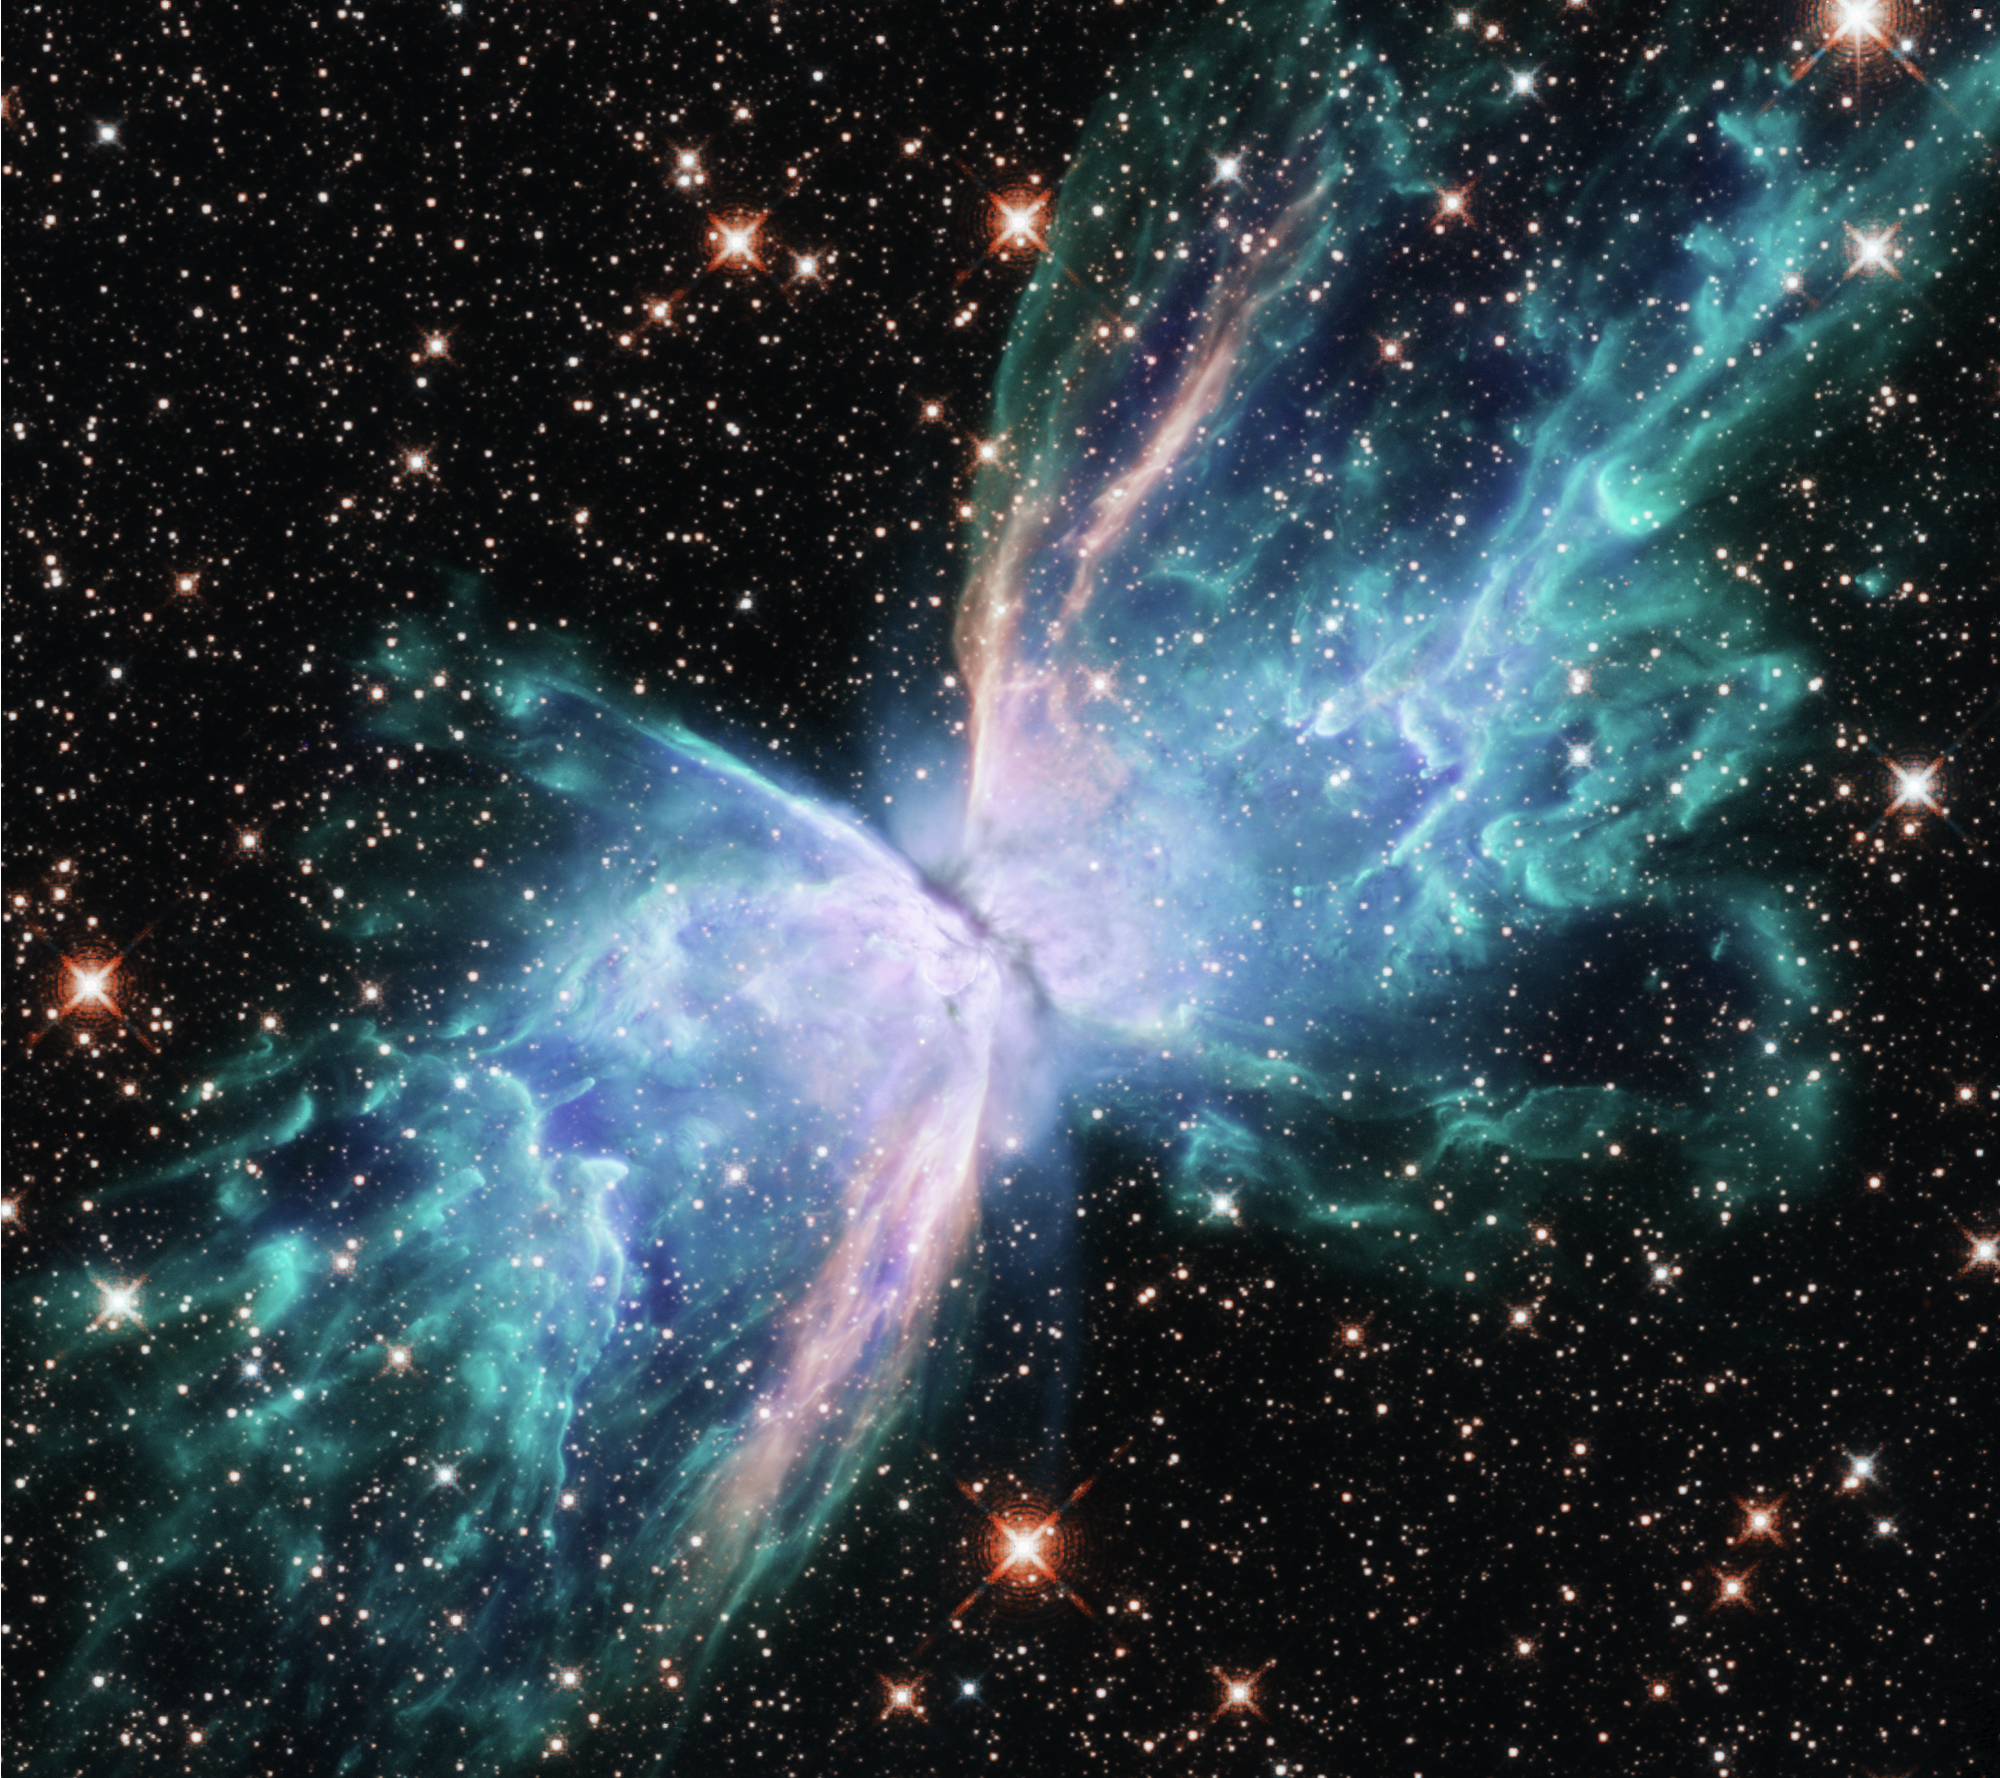 Resembling the shape of a butterfly, two lobes of gas and dust stretch across a starry black background in shades of green and blue, growing paler toward where they meet.